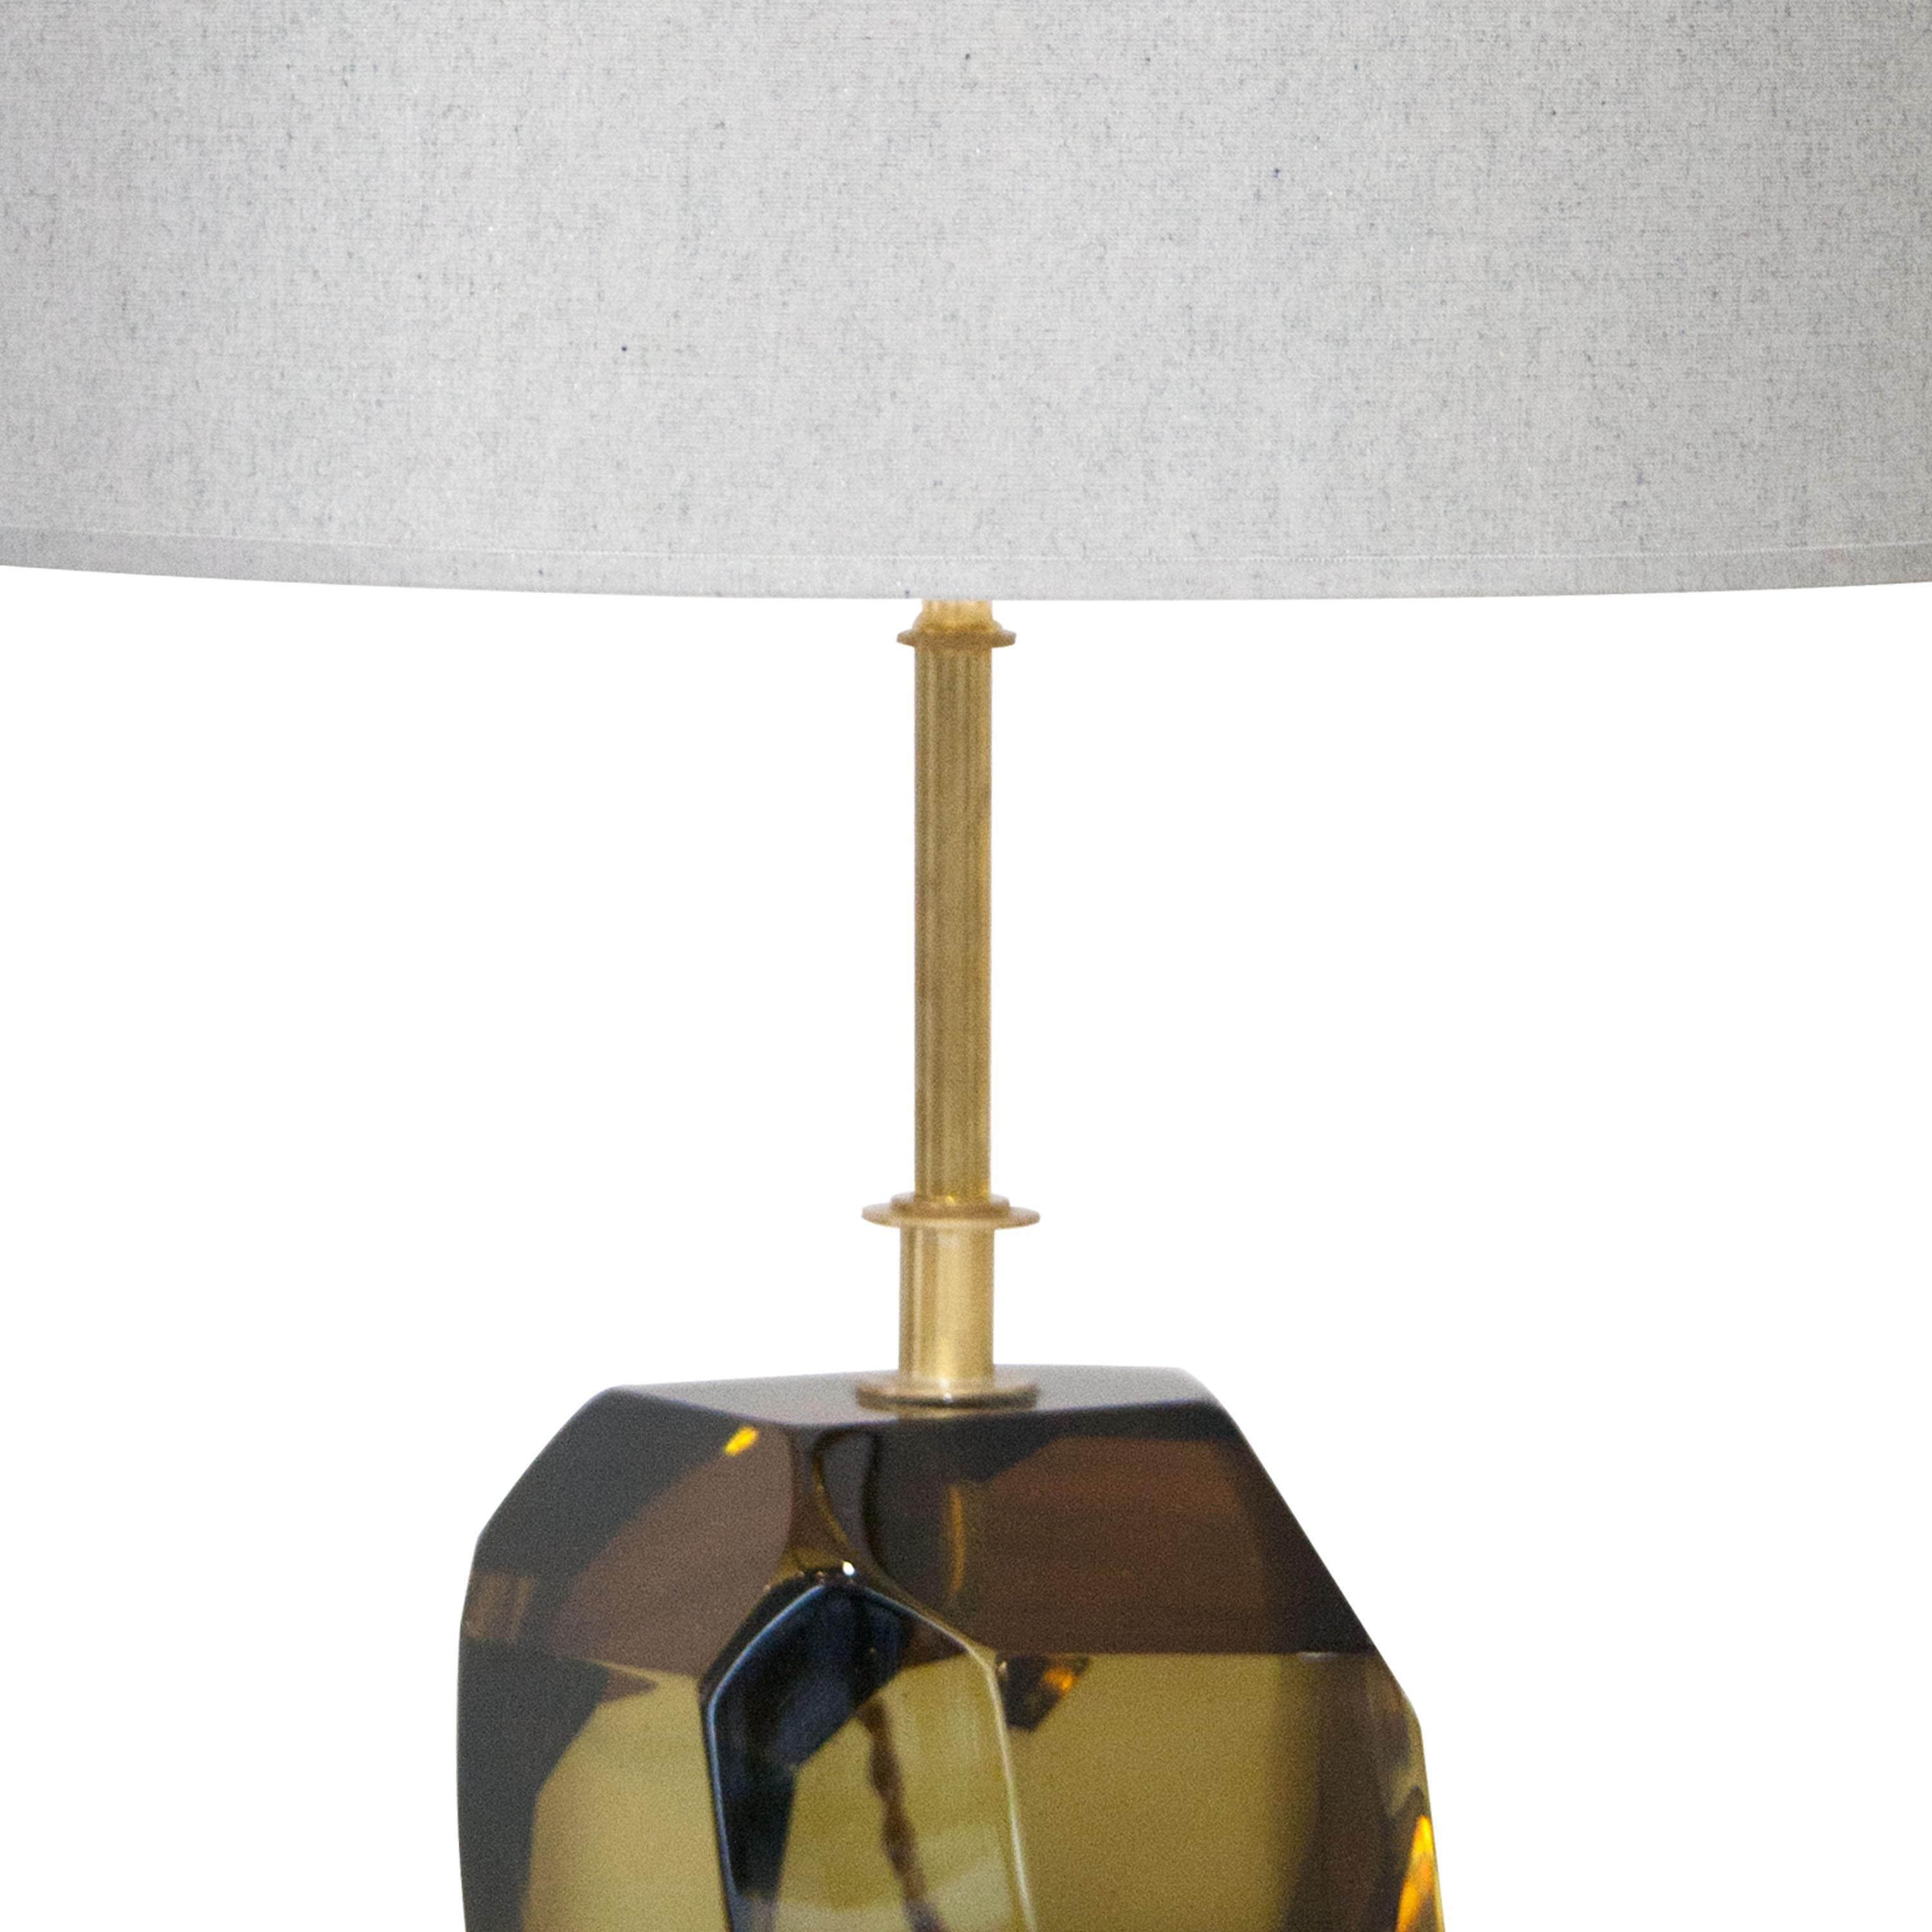 Table lamp with Murano faceted glass in translucent green and brass stem made by hand.